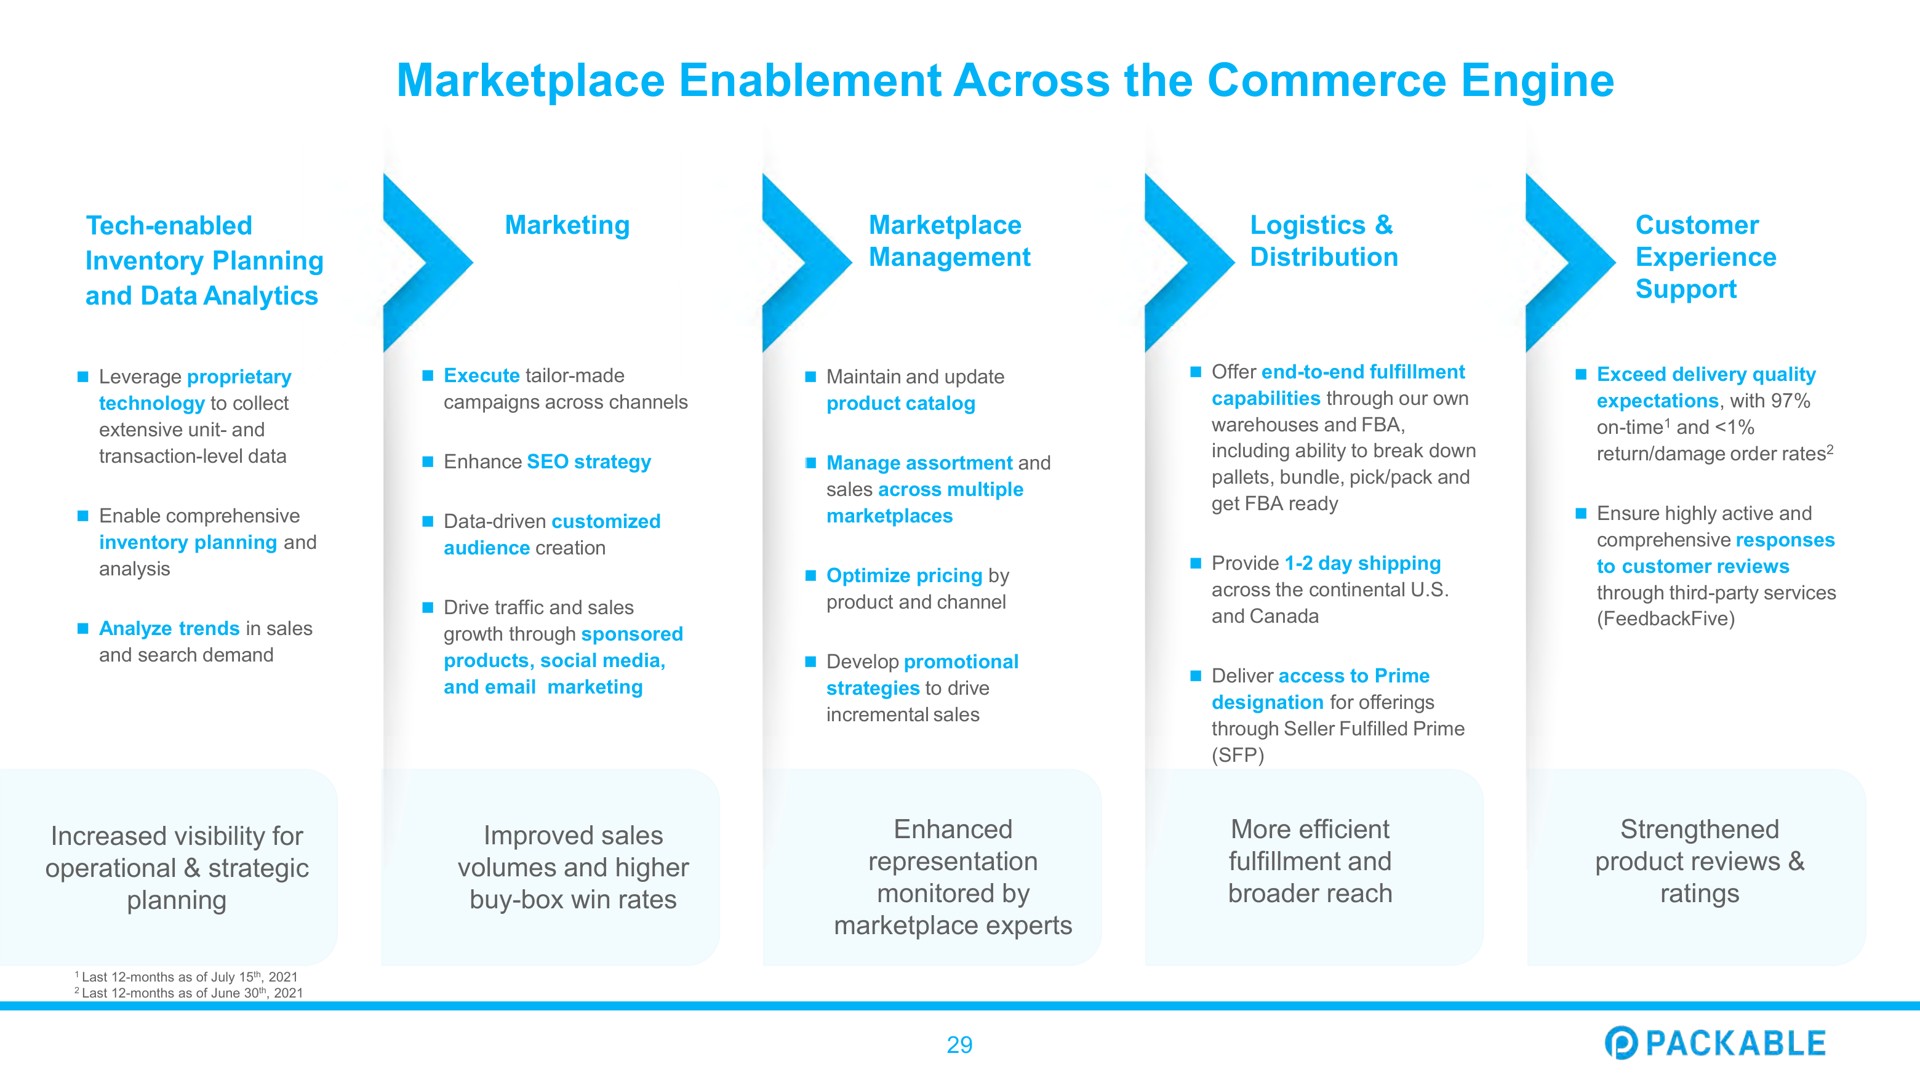 enablement across the commerce engine | Packable